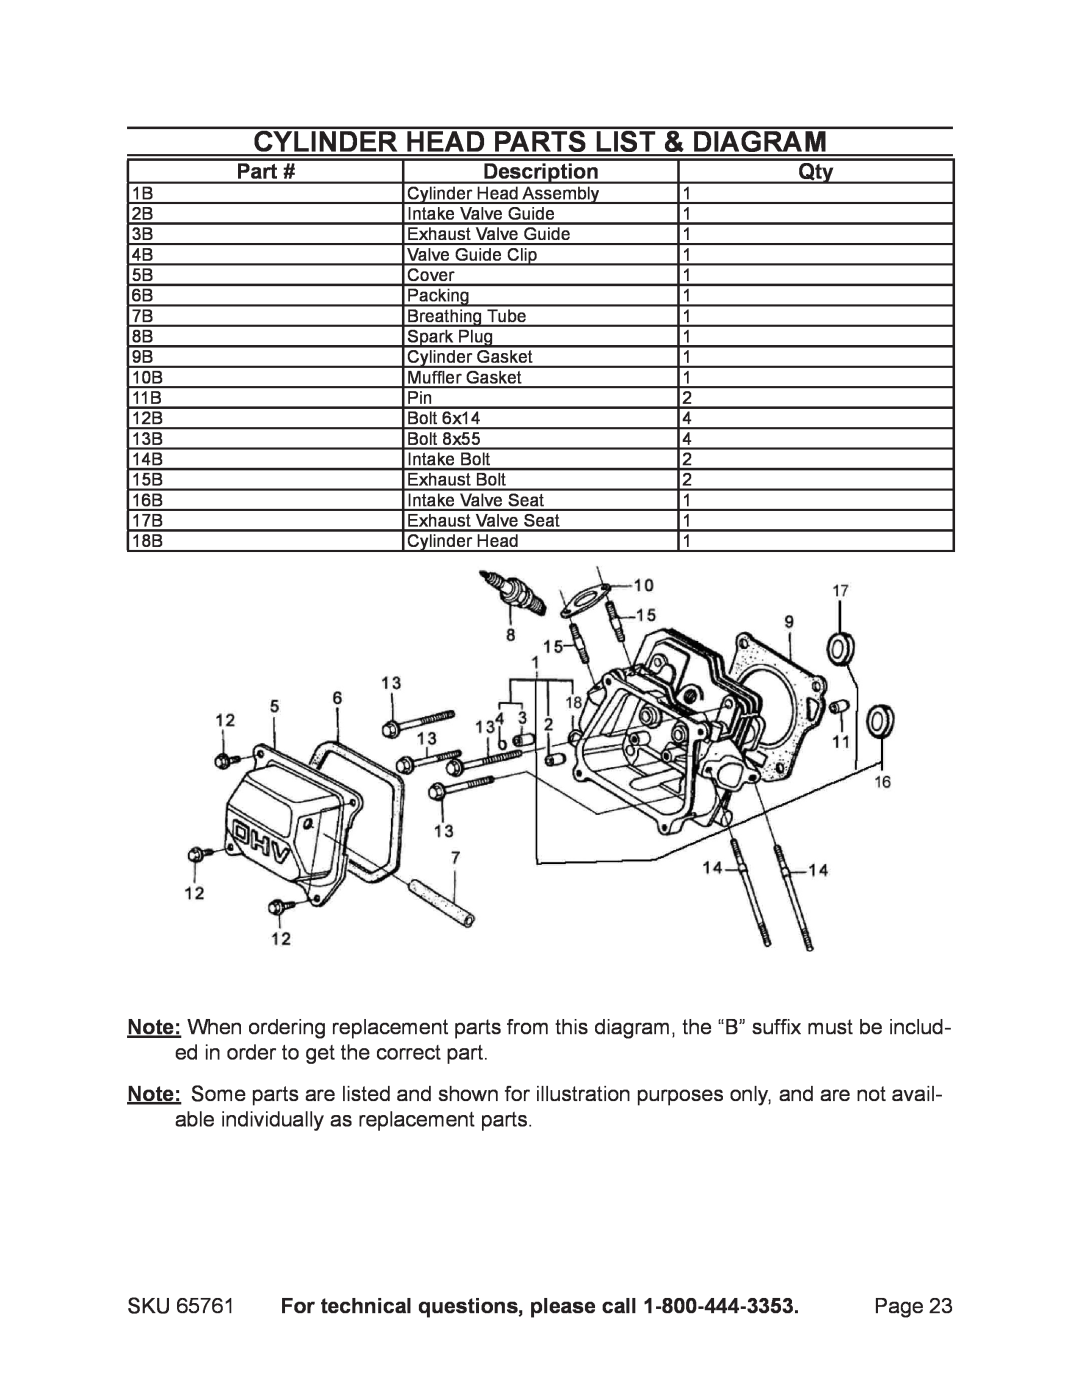 Harbor Freight Tools 65761 manual Cylinder head parts list & diagram, Description, For technical questions, please call 